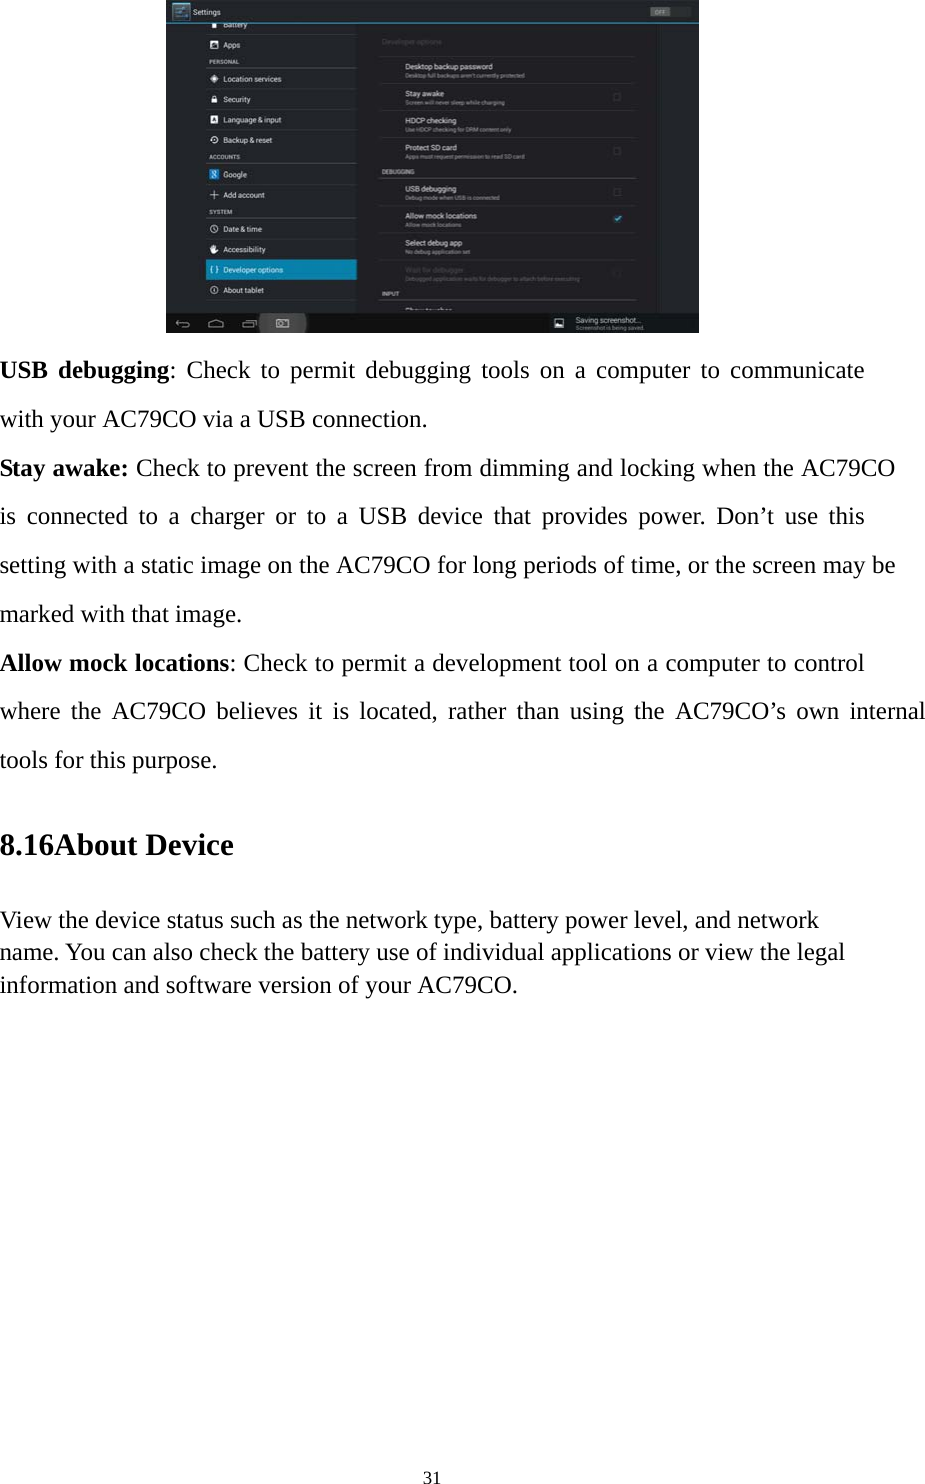 31  USB debugging: Check to permit debugging tools on a computer to communicate with your AC79CO via a USB connection. Stay awake: Check to prevent the screen from dimming and locking when the AC79CO is connected to a charger or to a USB device that provides power. Don’t use this setting with a static image on the AC79CO for long periods of time, or the screen may be marked with that image. Allow mock locations: Check to permit a development tool on a computer to control where the AC79CO believes it is located, rather than using the AC79CO’s own internal tools for this purpose. 8.16About Device View the device status such as the network type, battery power level, and network name. You can also check the battery use of individual applications or view the legal information and software version of your AC79CO.   